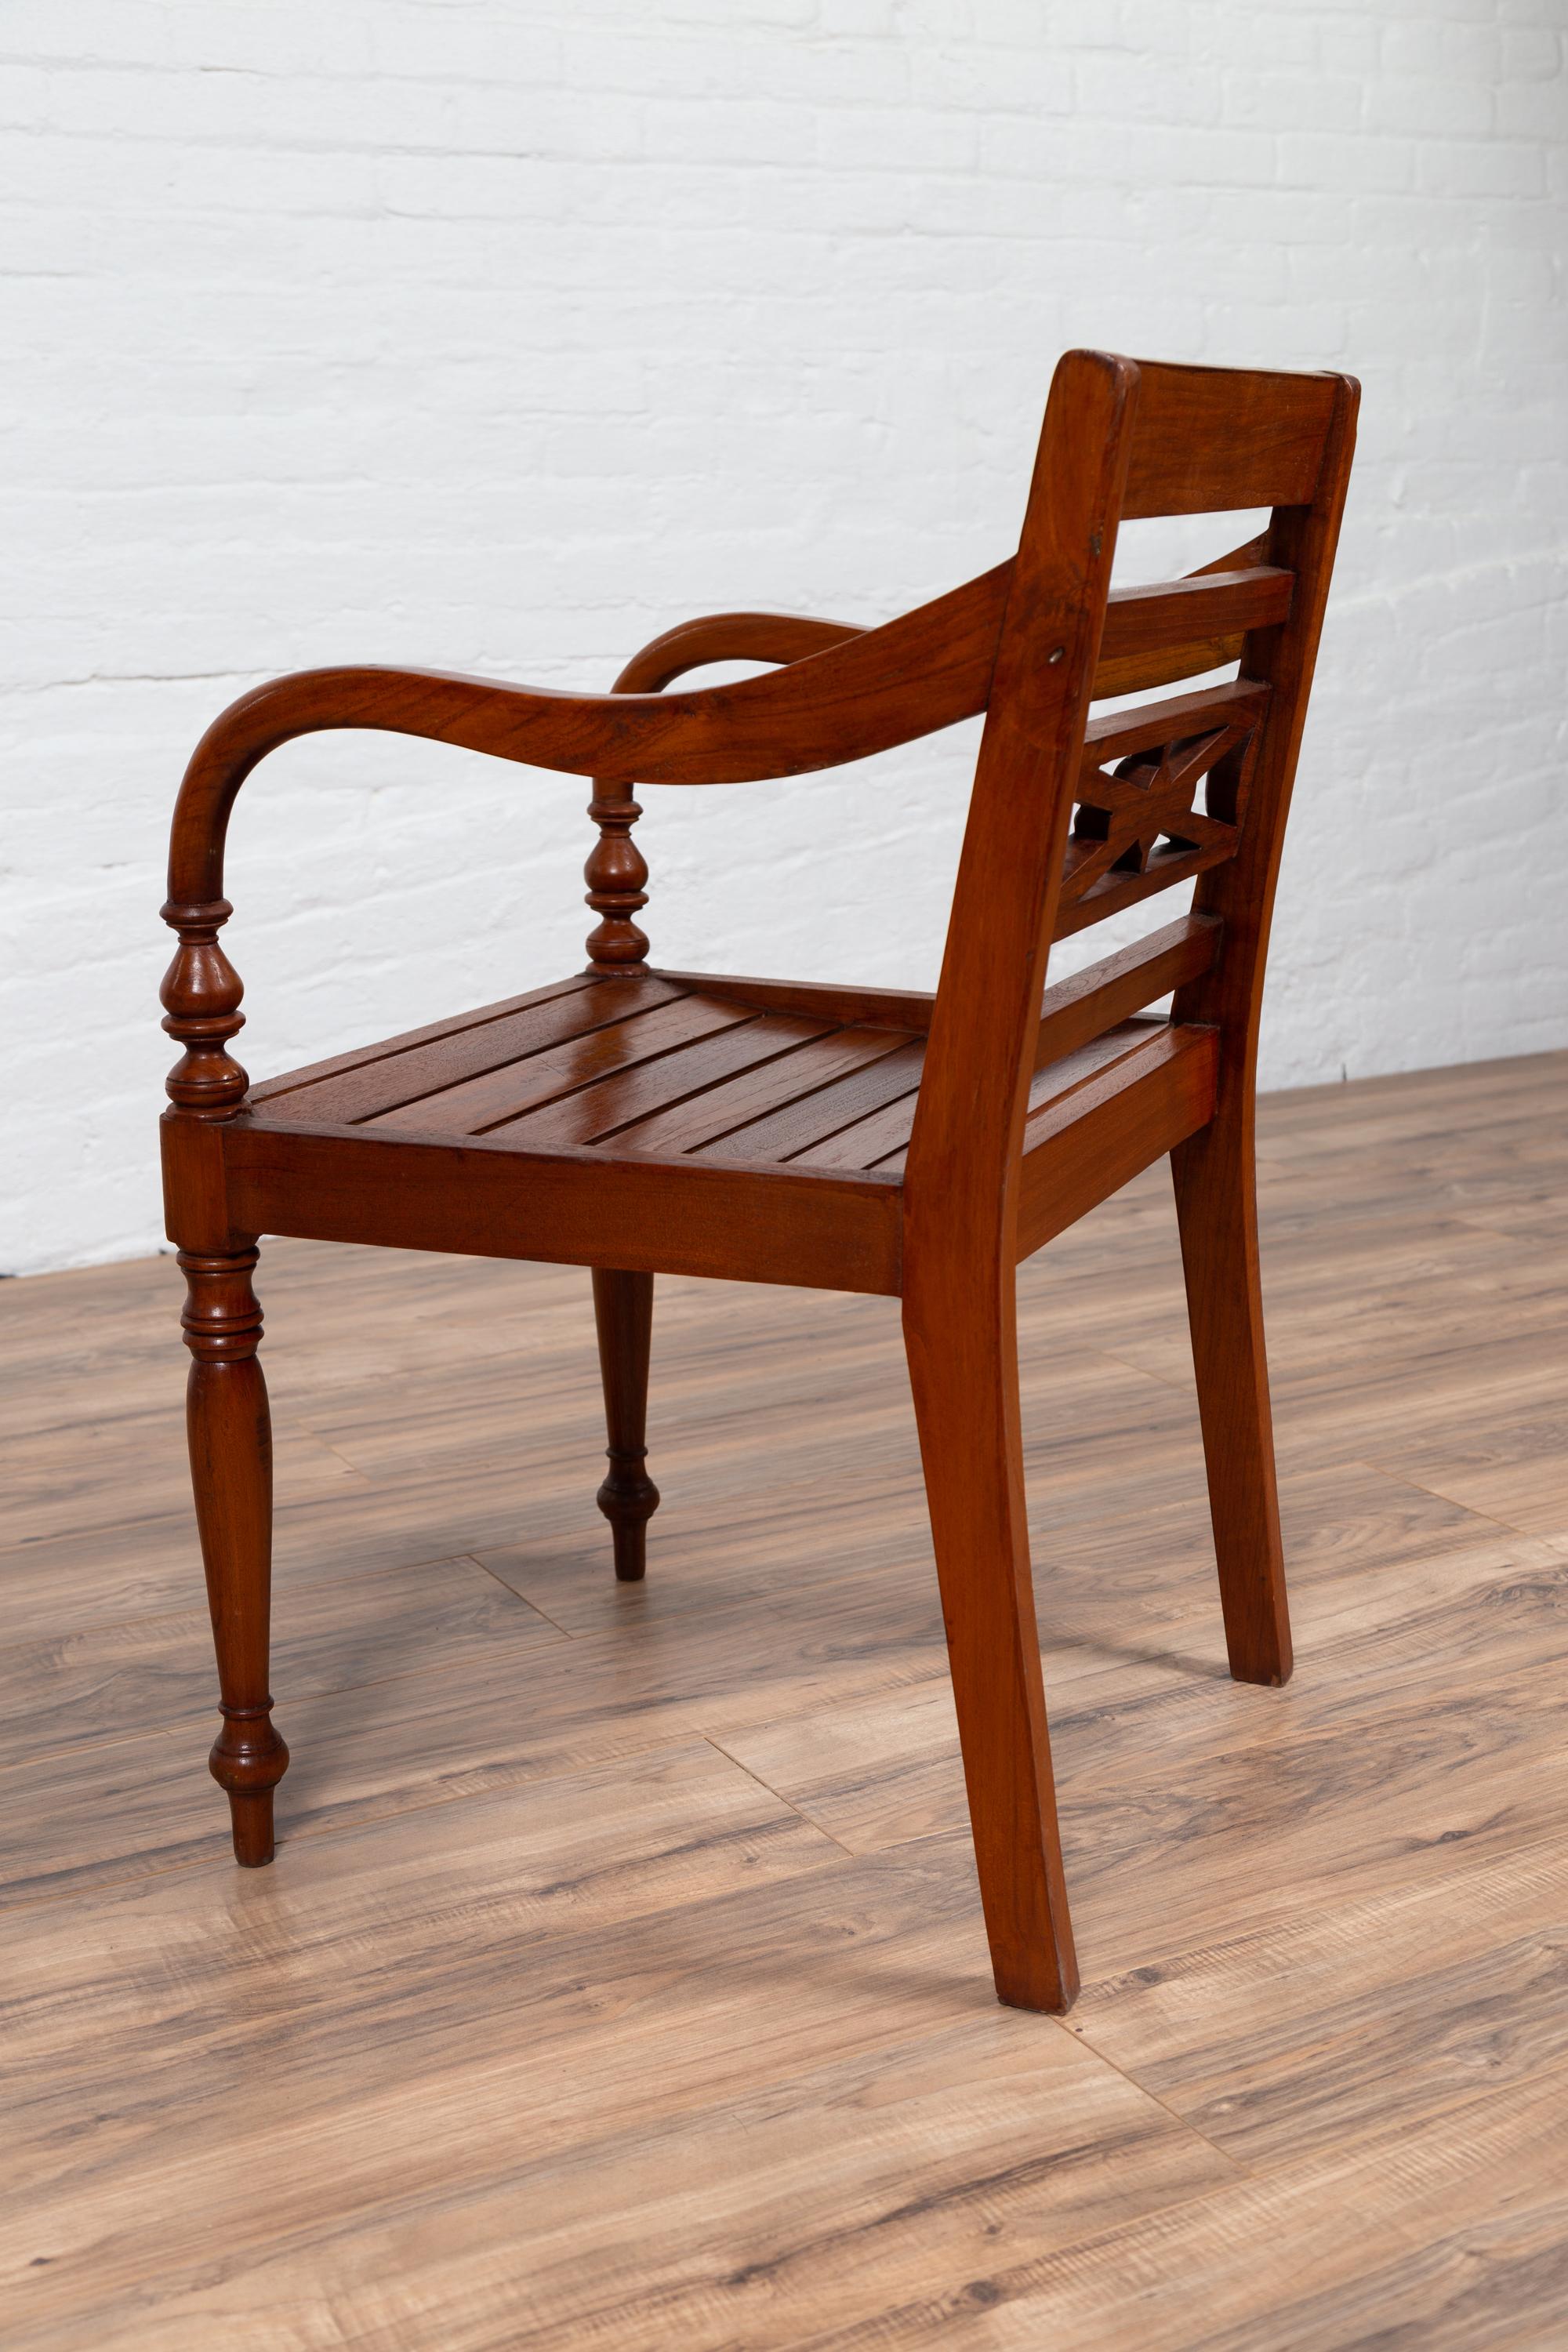 Early 20th Century Captain's Chair from Bali with Slatted Wood and Loop Arms For Sale 4